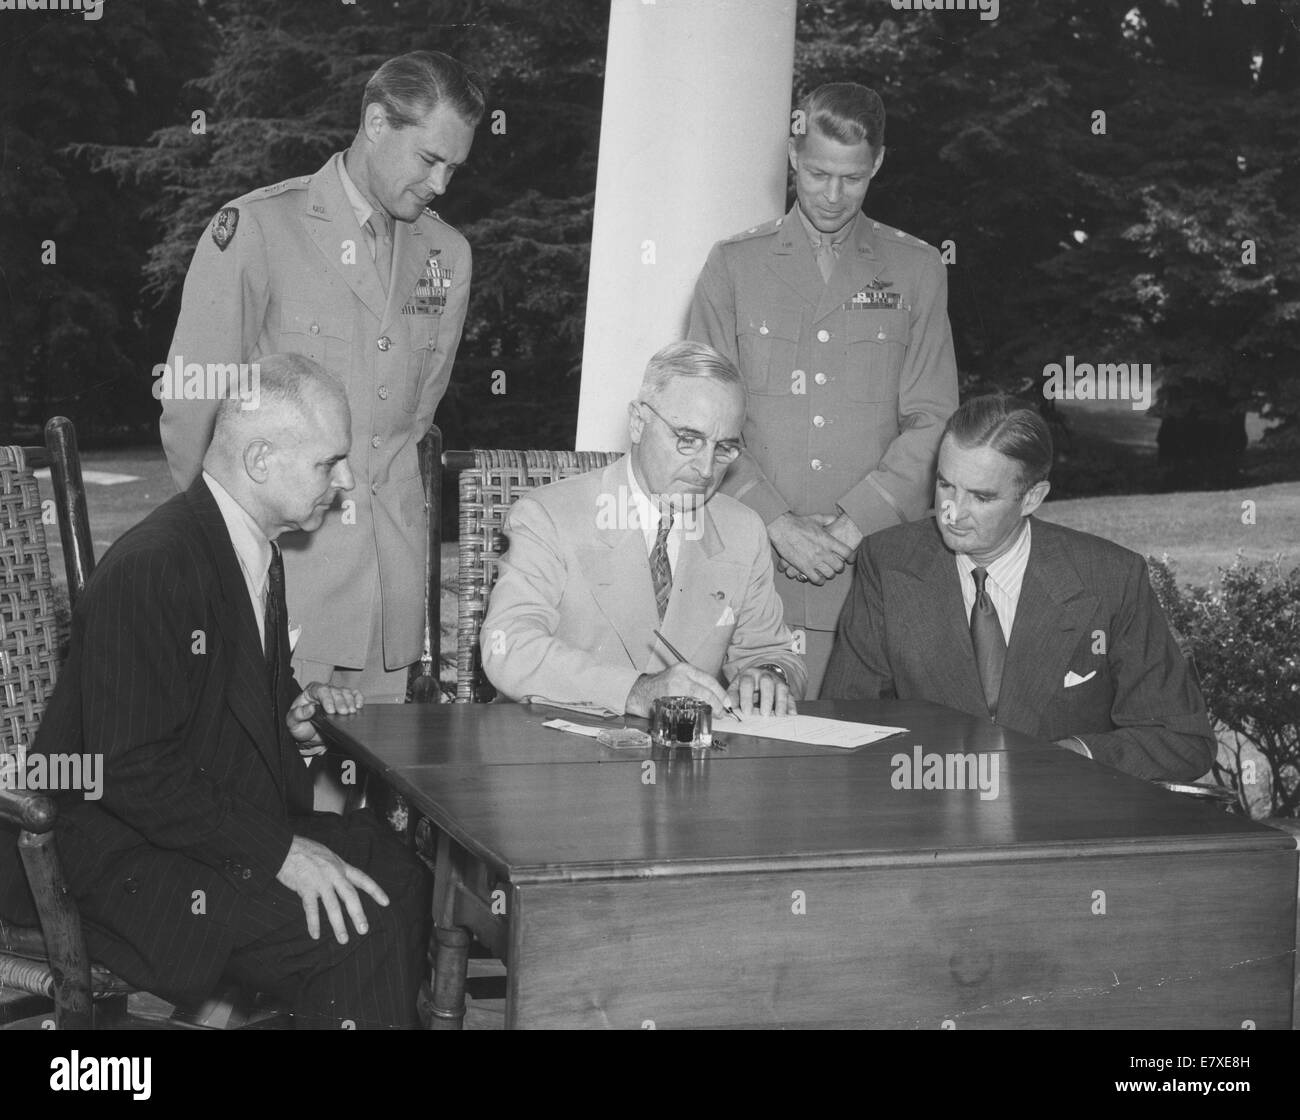 Aug 10, 1943 - Washington, District of Columbia, U.S. - President HARRY S. TRUMAN (C) signs a proclamation marking August 1st, 1947, the 40th birthday of the AAF, as Air Force Day, at a White House ceremony on the 10th, witnessed by former Lieutenant General JAMES H. DOOLITTLE (L), president of the Air Force Association; W. STUART SYMINGTON (R), Assistant Secretary of War for Air; Major General LAURIE NORSTAD (2nd R) and Director of Plans and Operations Division of the War Department General Staff; and Lieutenant General HOYT S. VANDENBERG (2nd L), Deputy Commander of the AAF. Observances from Stock Photo